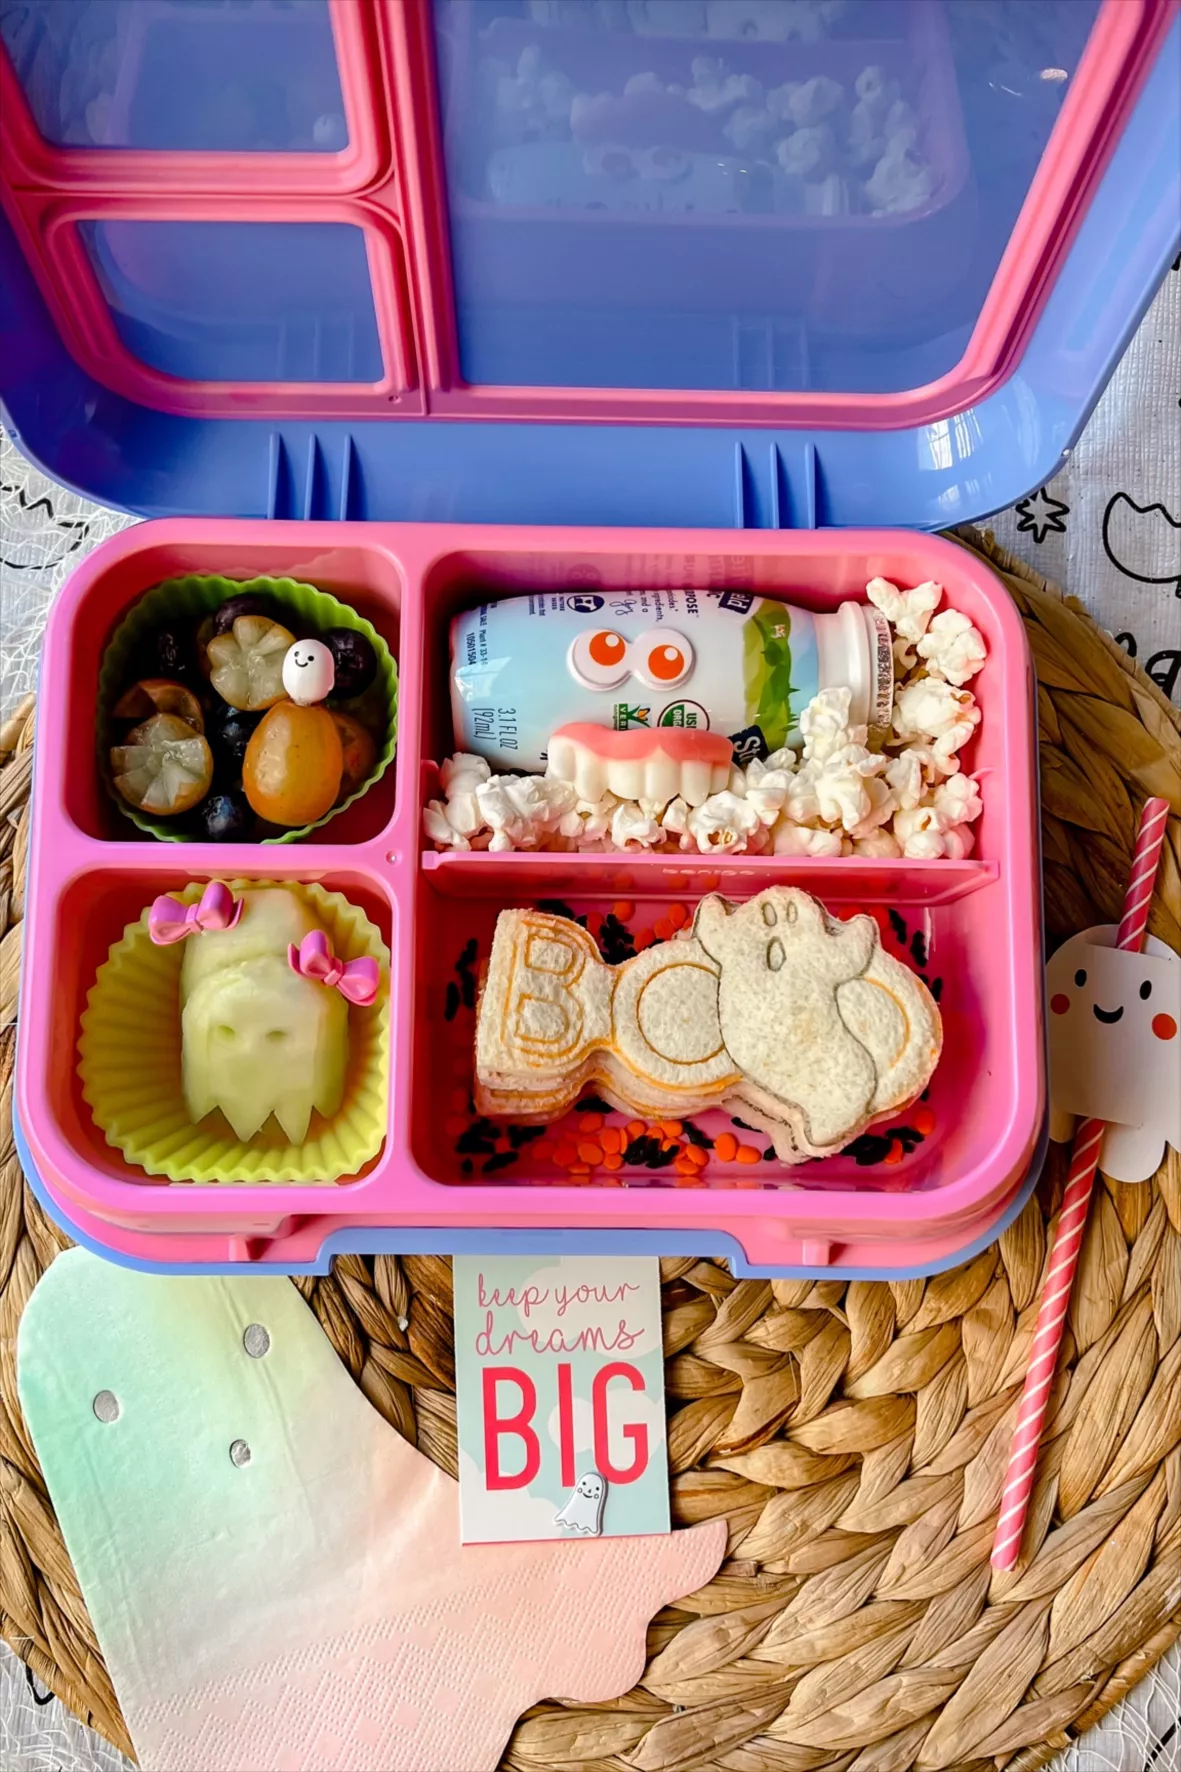 EASY LUNCHBOX IDEAS 💡 Featuring the incredible Munchkin lunchbox